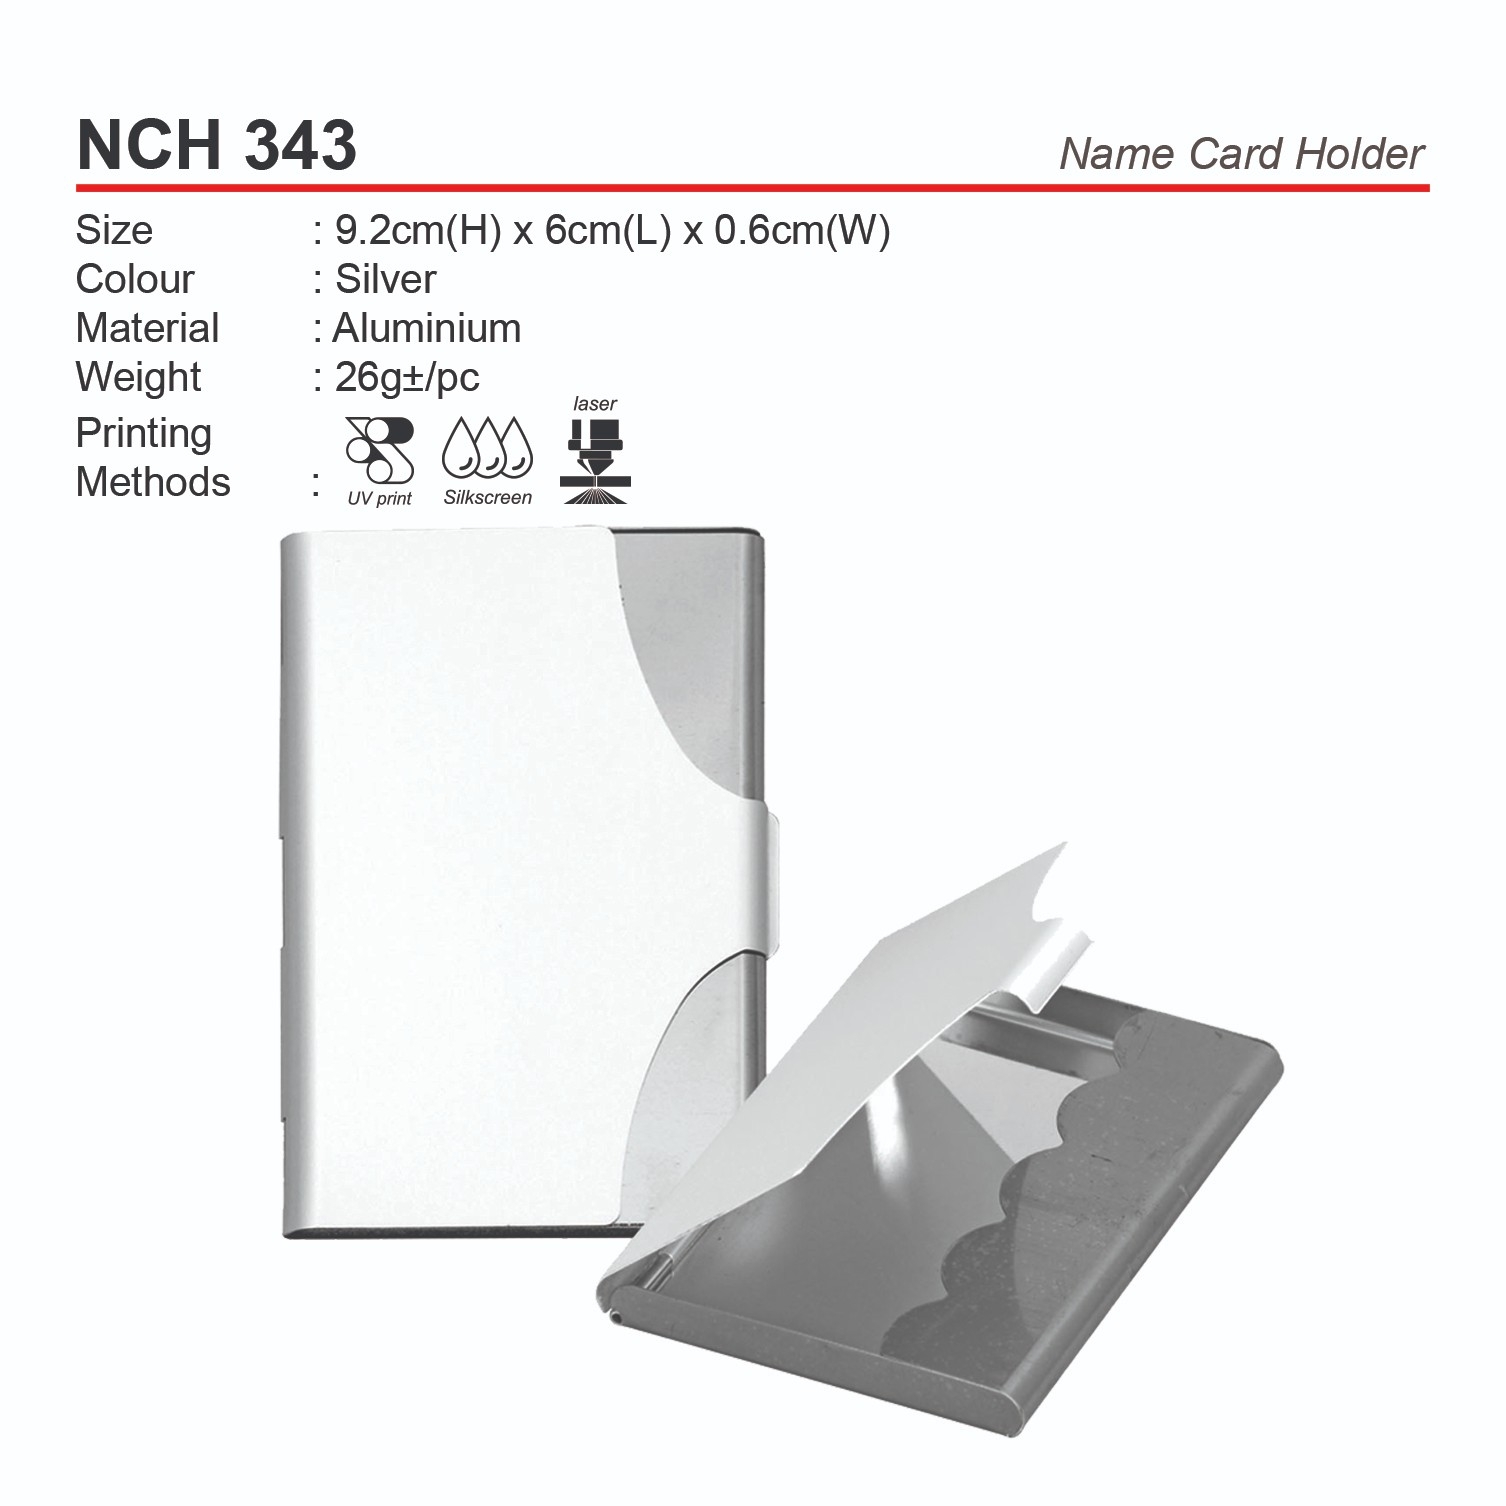 NCH343 Name Card Holder (A)